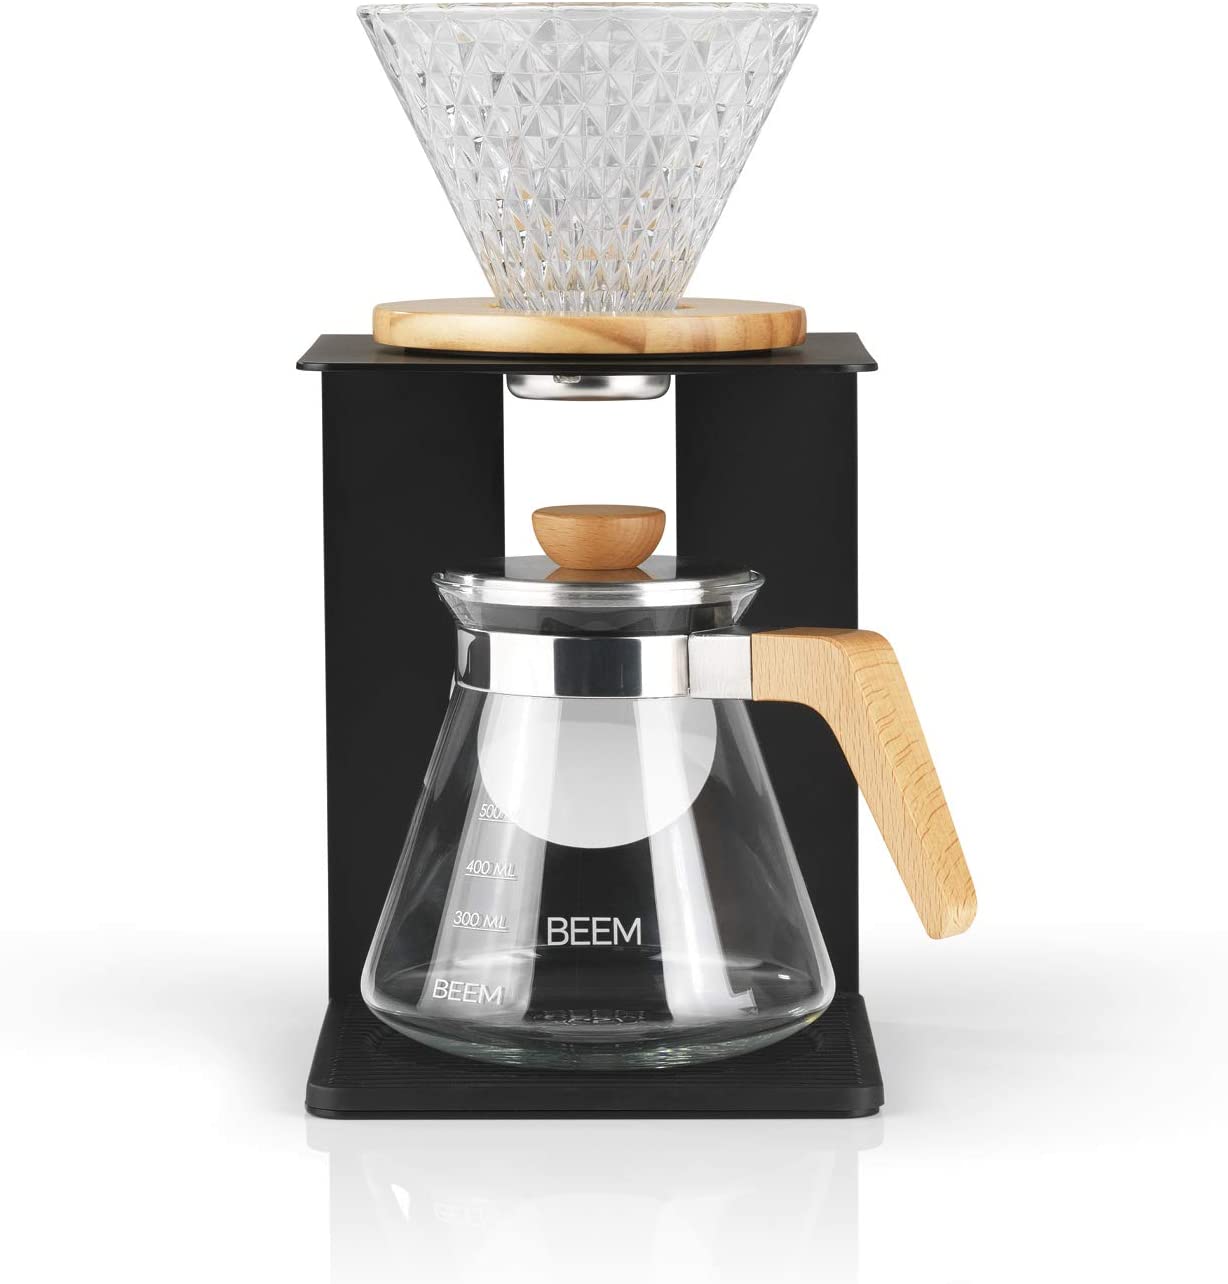 BEEM Pour Over Coffee Maker Set - 4 Cups | Glass Hand Filter in Diamond Look (Size 2), 0.5 Litre Glass Jug with Lid, Wooden Appliqués, Manual Coffee Brewing Art for a Particularly Mild Coffee Aroma